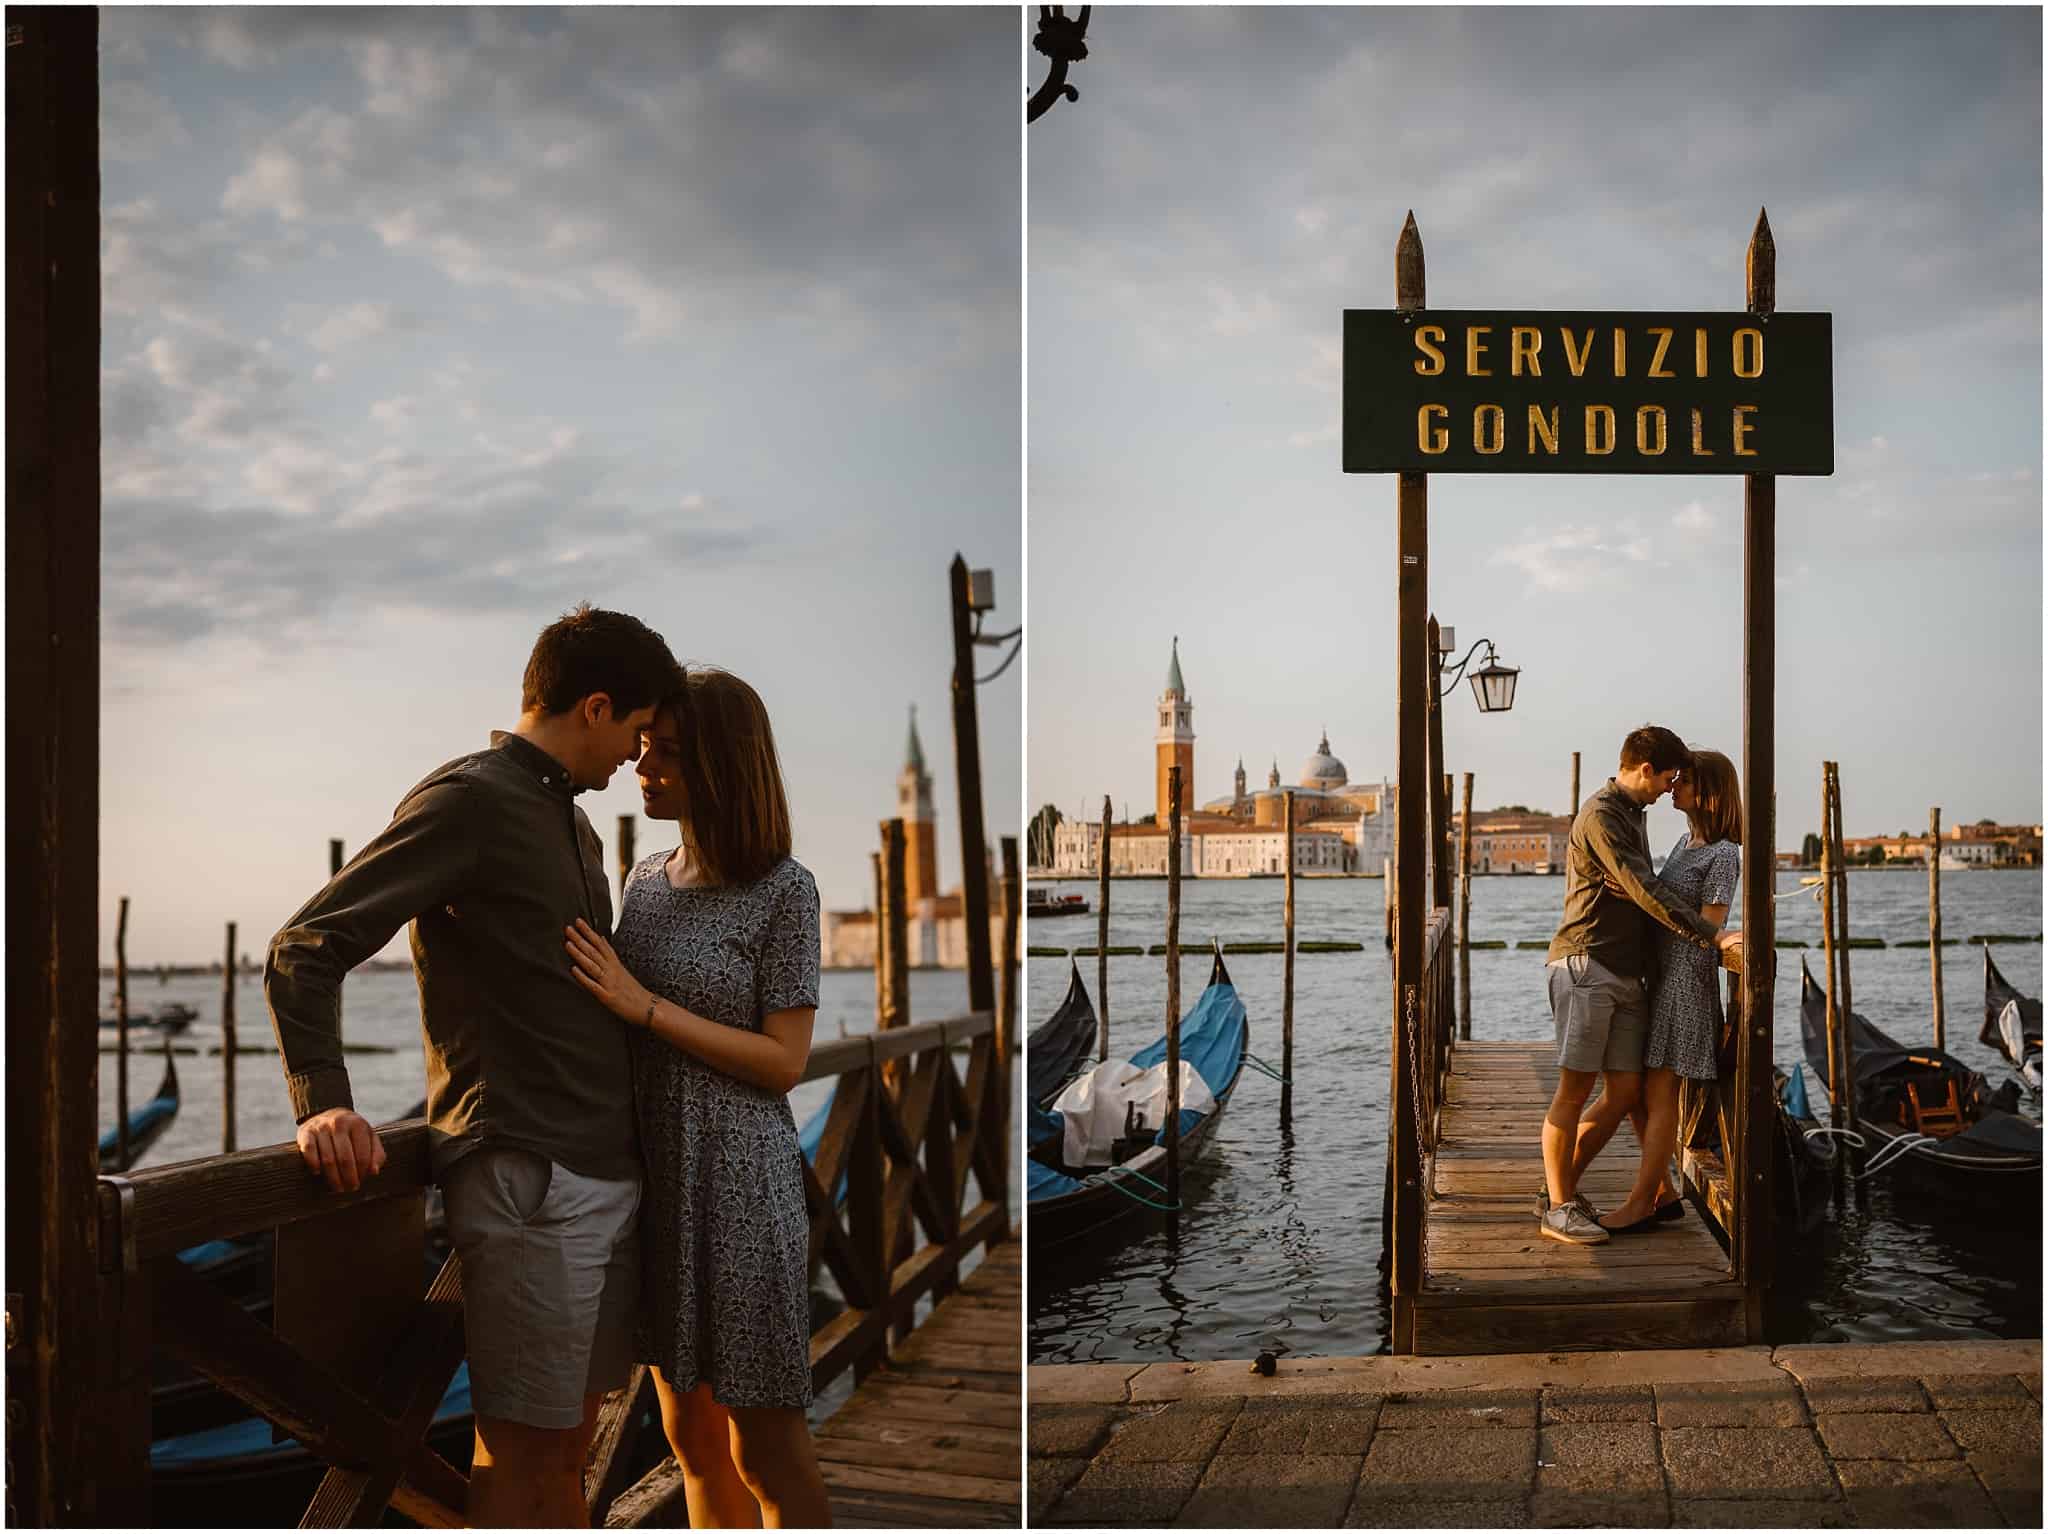 Couple photo shoot in Venice by wedding photographers Ludovica lanzafami and Valerio Elia